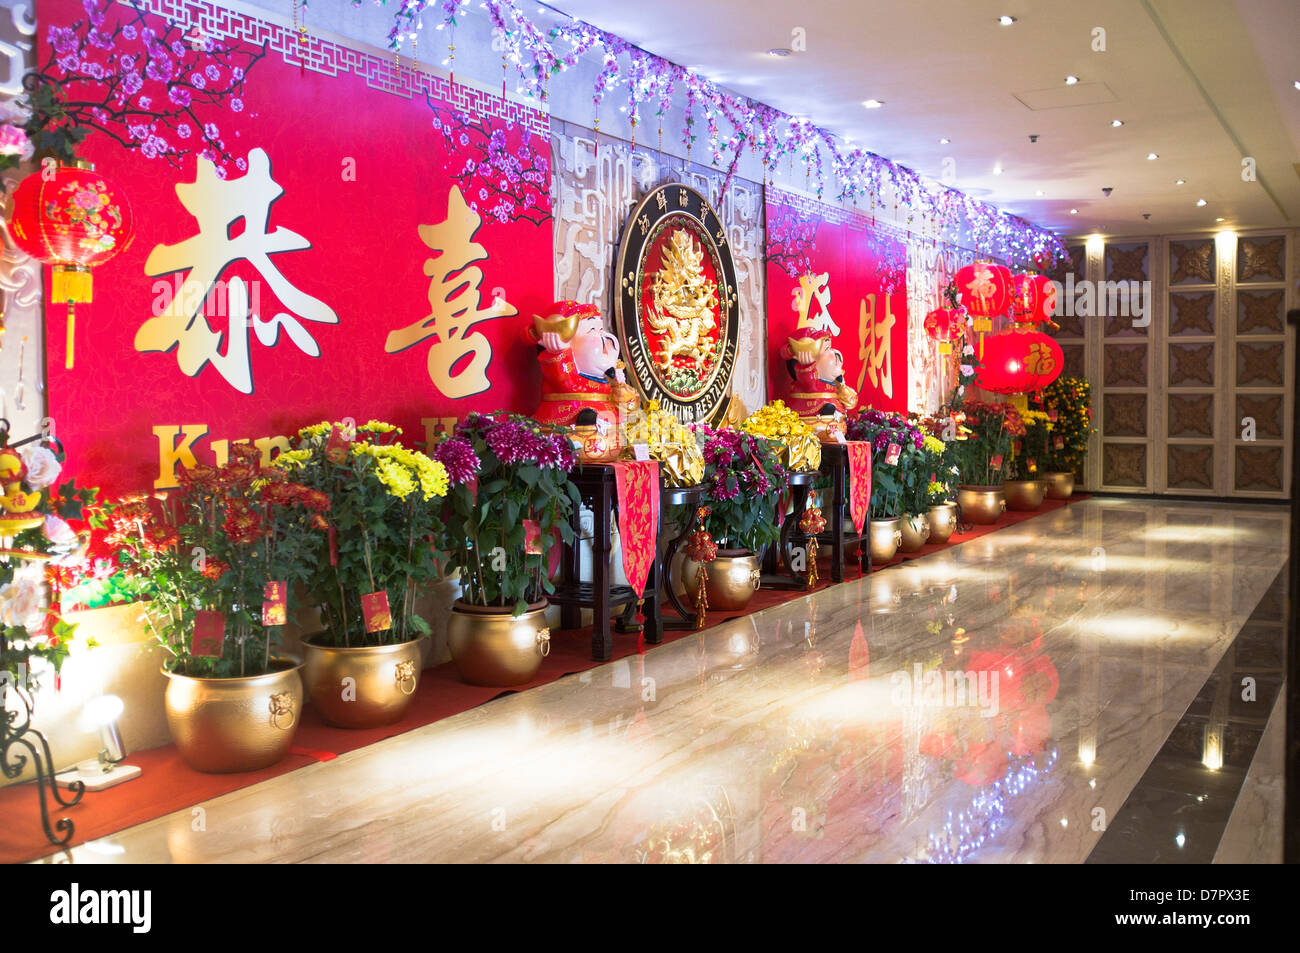 dh Jumbo Floating Restaurant ABERDEEN HONG KONG Chinese New Year flowers and decorations hk kingdom Stock Photo